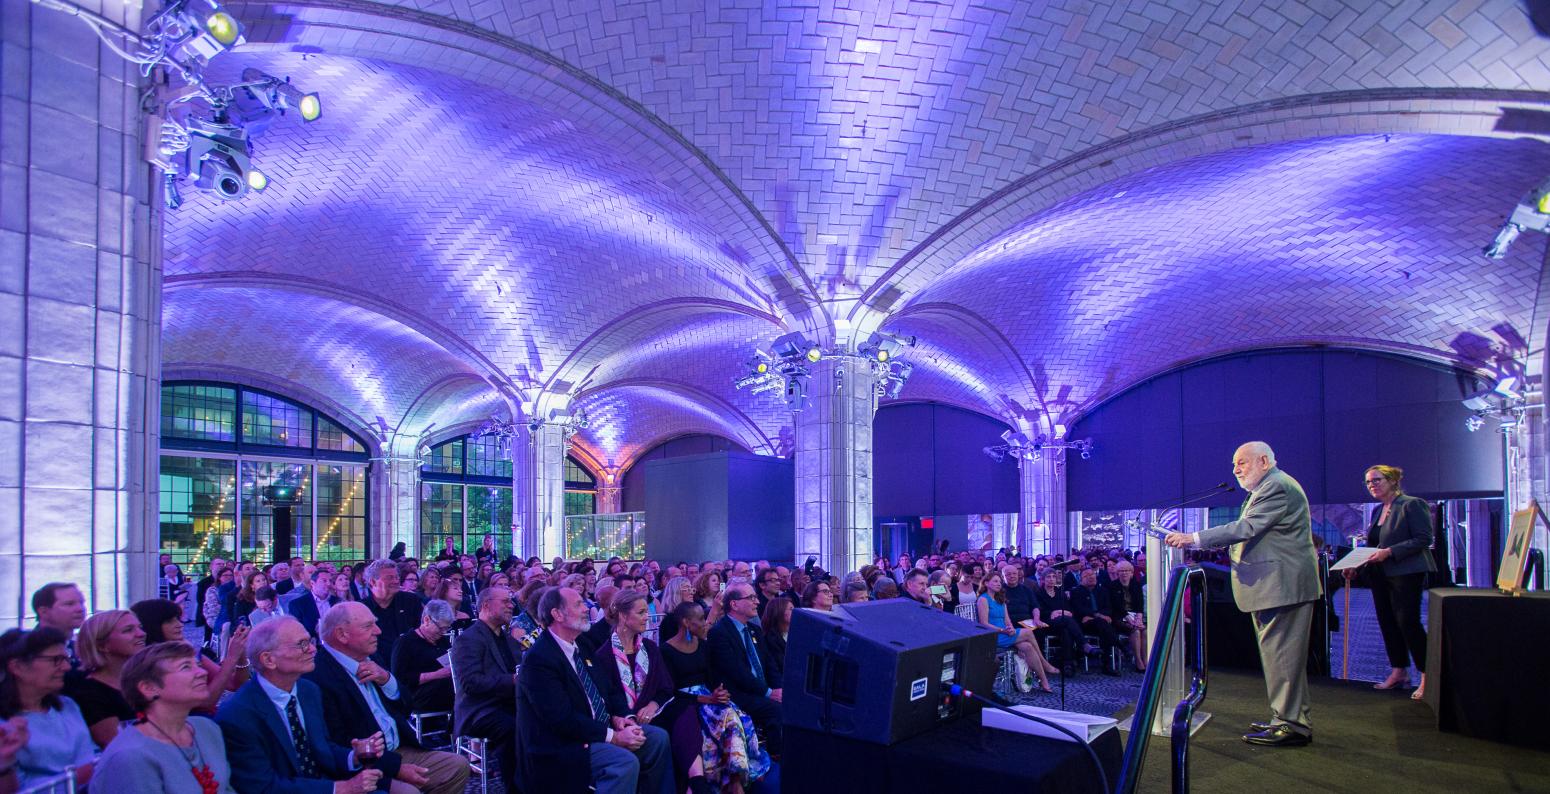 The Carle Honors audience inside Guastavino's